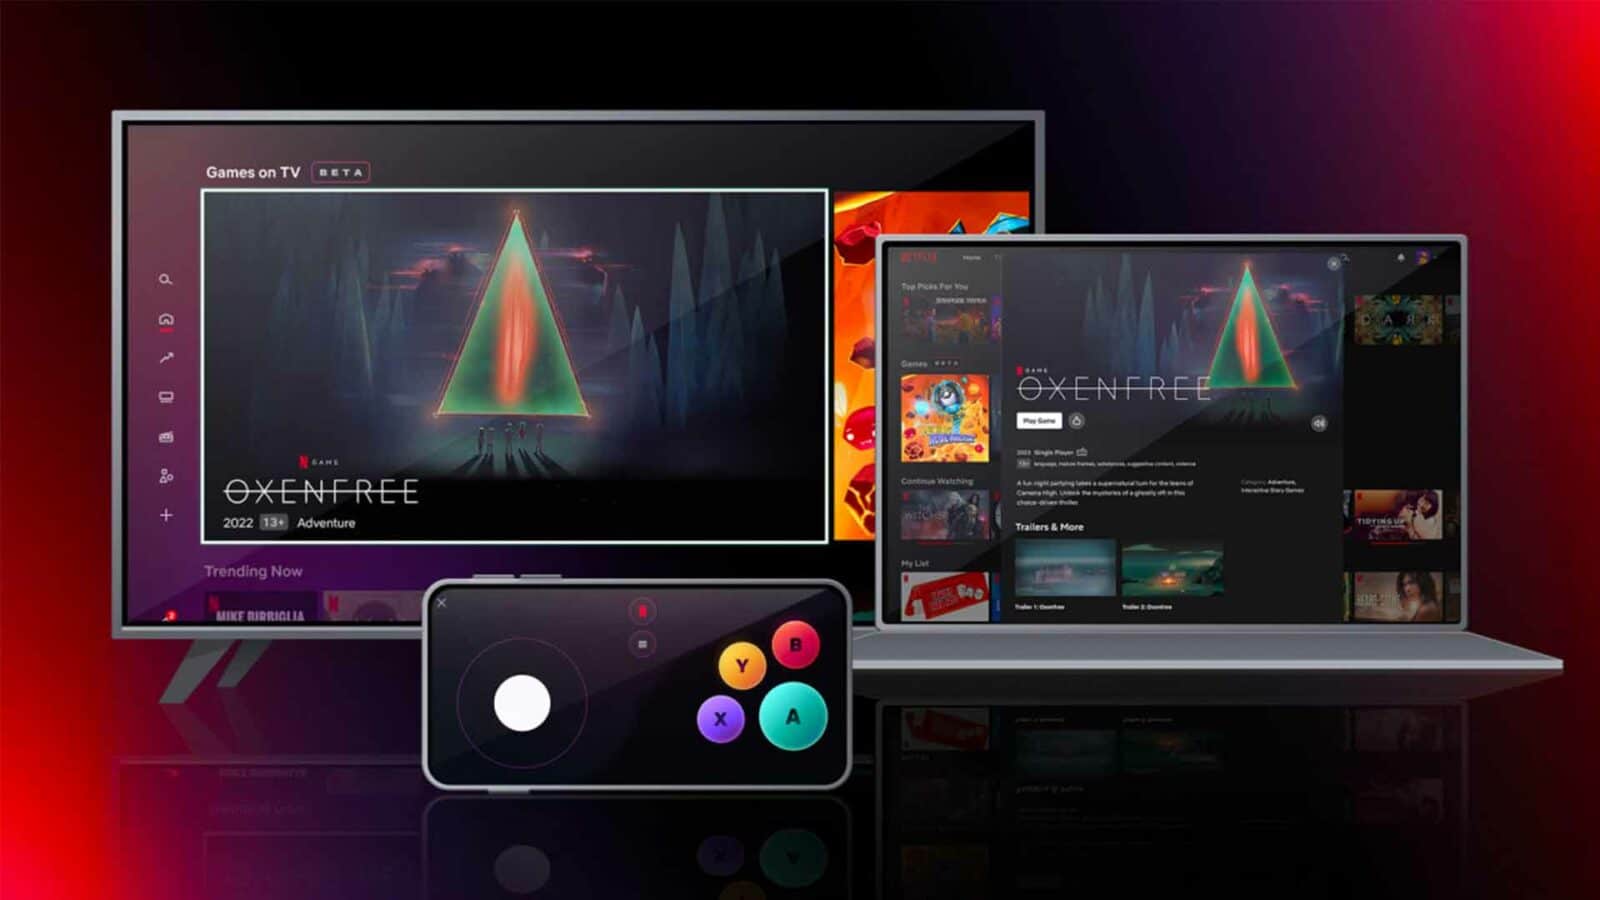 netflix gaming: People are watching trailers and other content related to the video game Oxenfree, which is a 13+ adventure game, and discussing the game online. Full Text: Games on TV BETA d GI & D @ % + DNIA OXENFREE N GAME OXENFREE Conbrive Watching 2022 13+ Adventure Trailers & More IDYINGUE Trending Now Hy UM MIKE BIRRIGLIA B Y X A